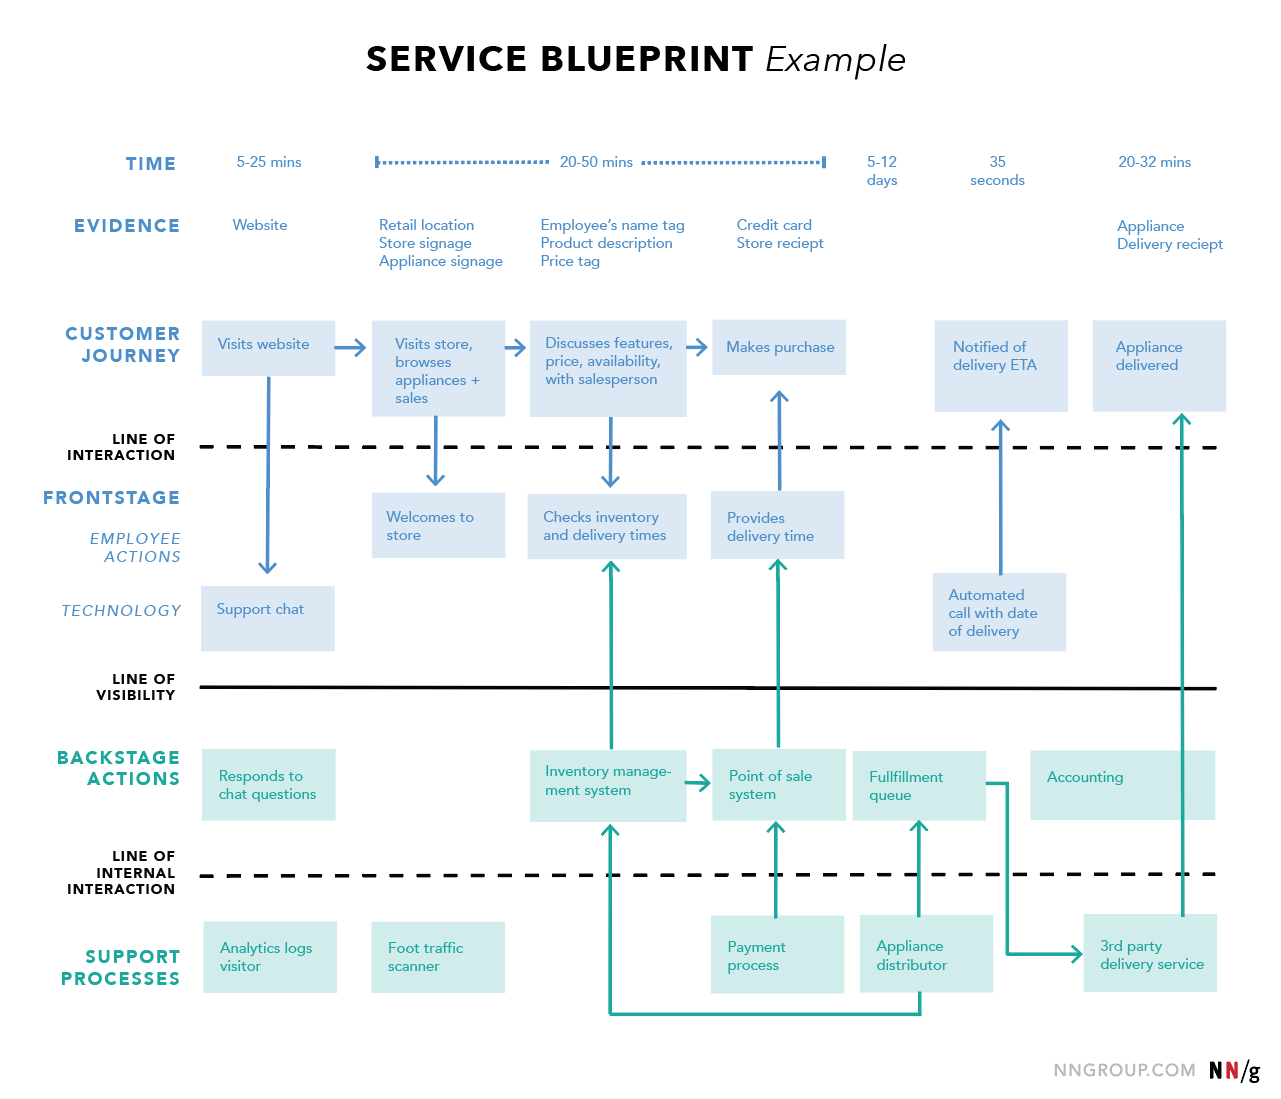 Service blueprint diagram showing the different layers of the diagram, front stage and back stage